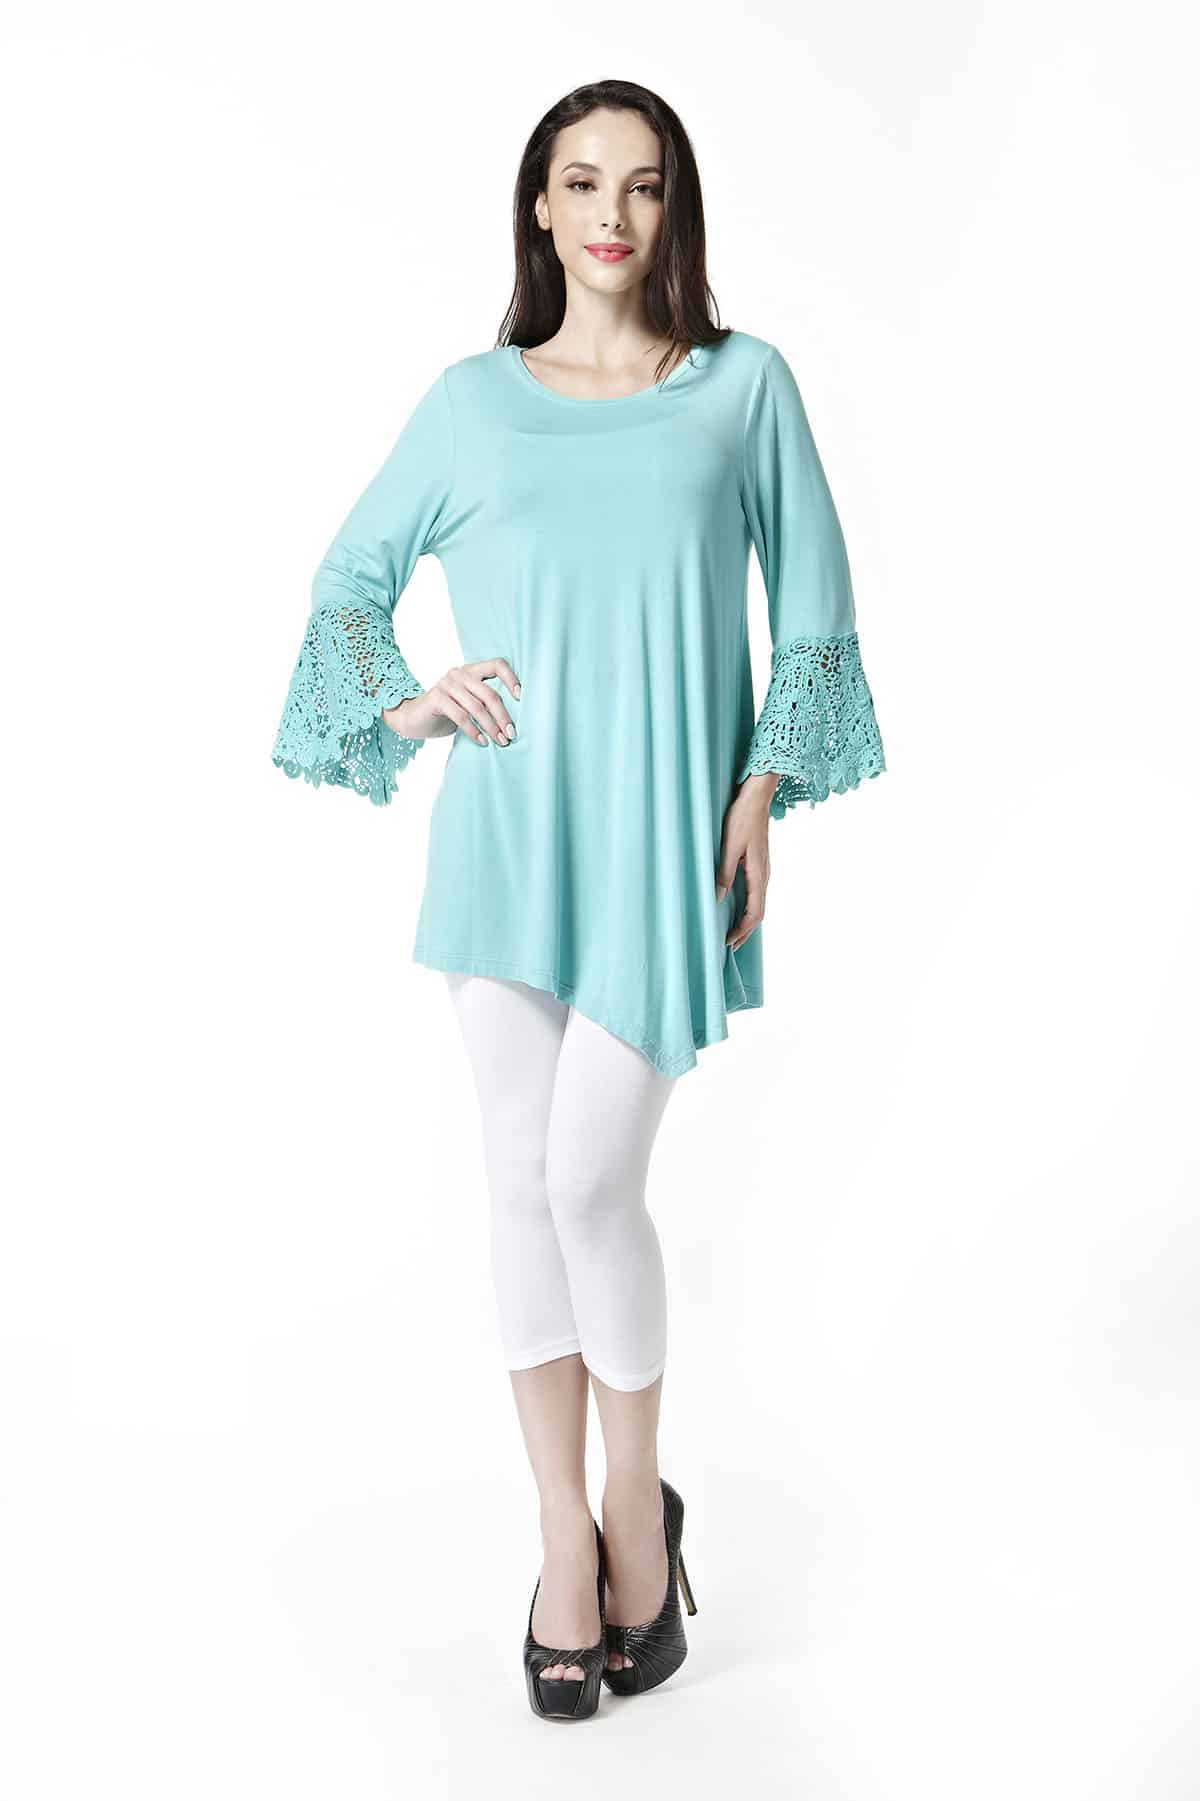 Bamboo Fabric Scoop Neck Bell Sleeve Top